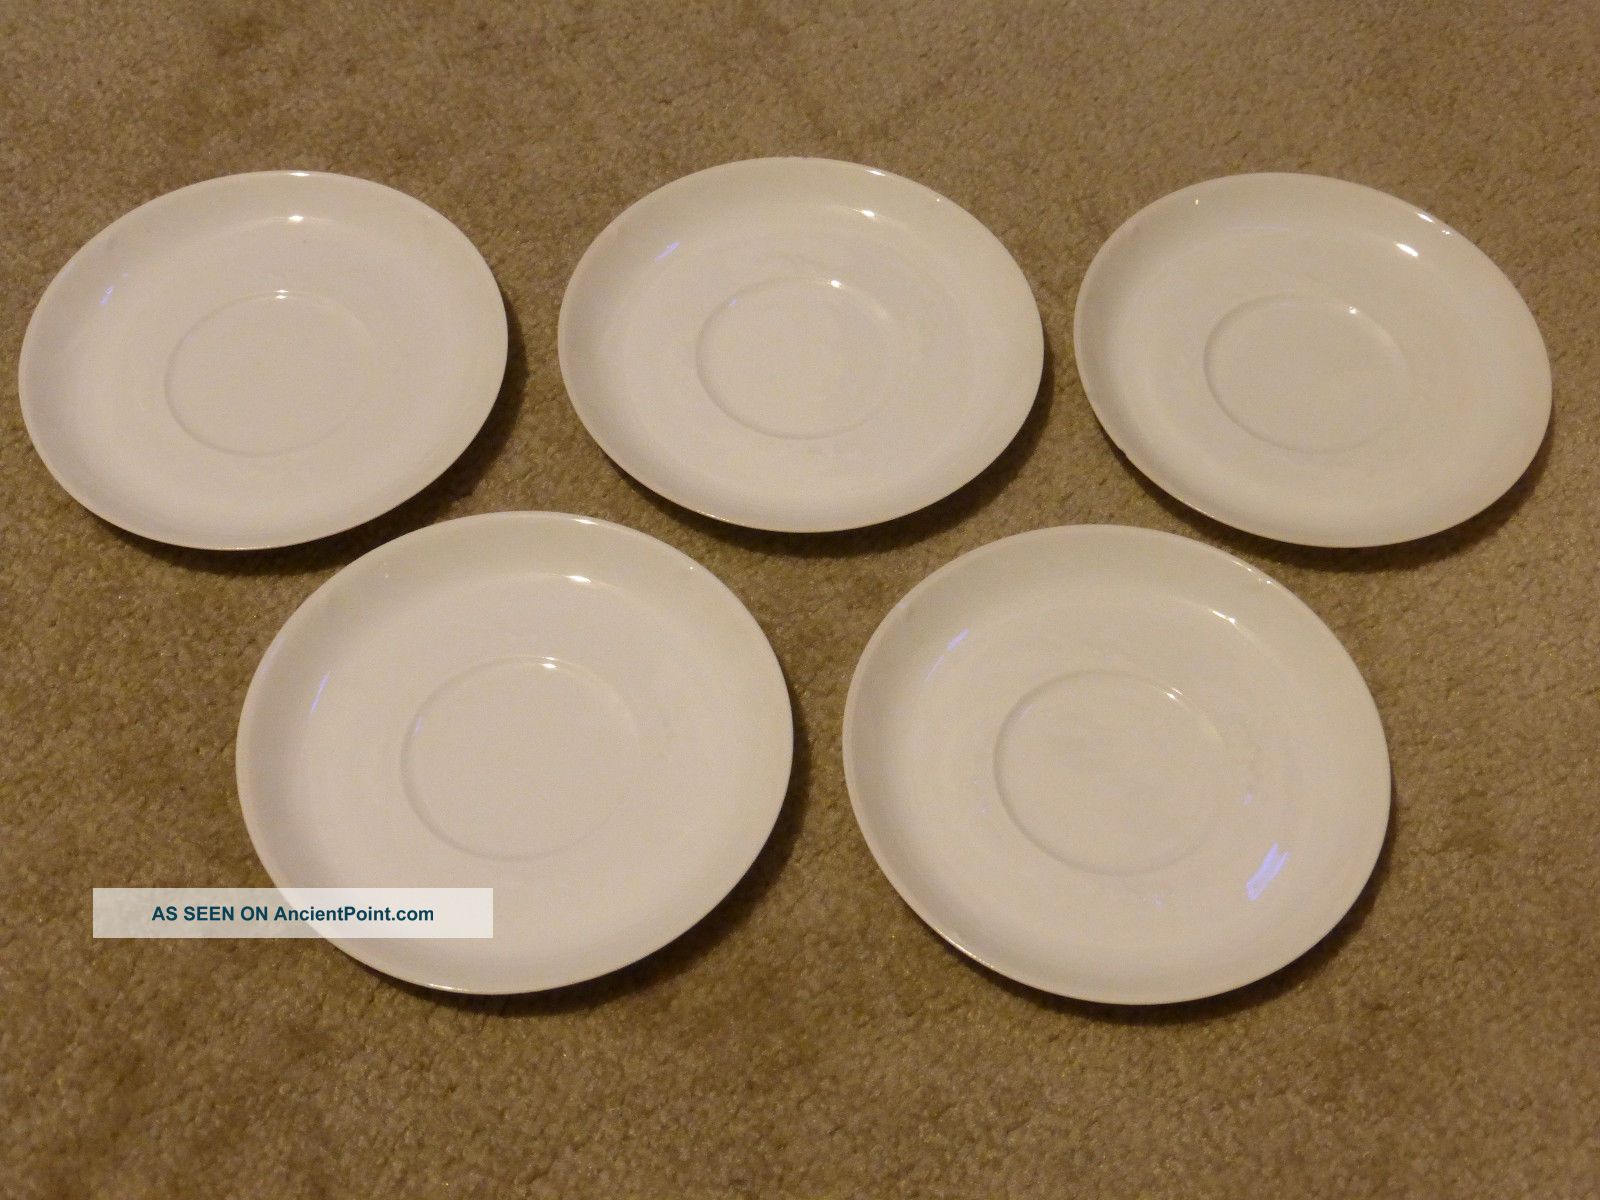 Antique Haviland Limoges Cfh Gdm Whiteware Blank Saucers Of 5 Circa 1881 - 90 Cups & Saucers photo